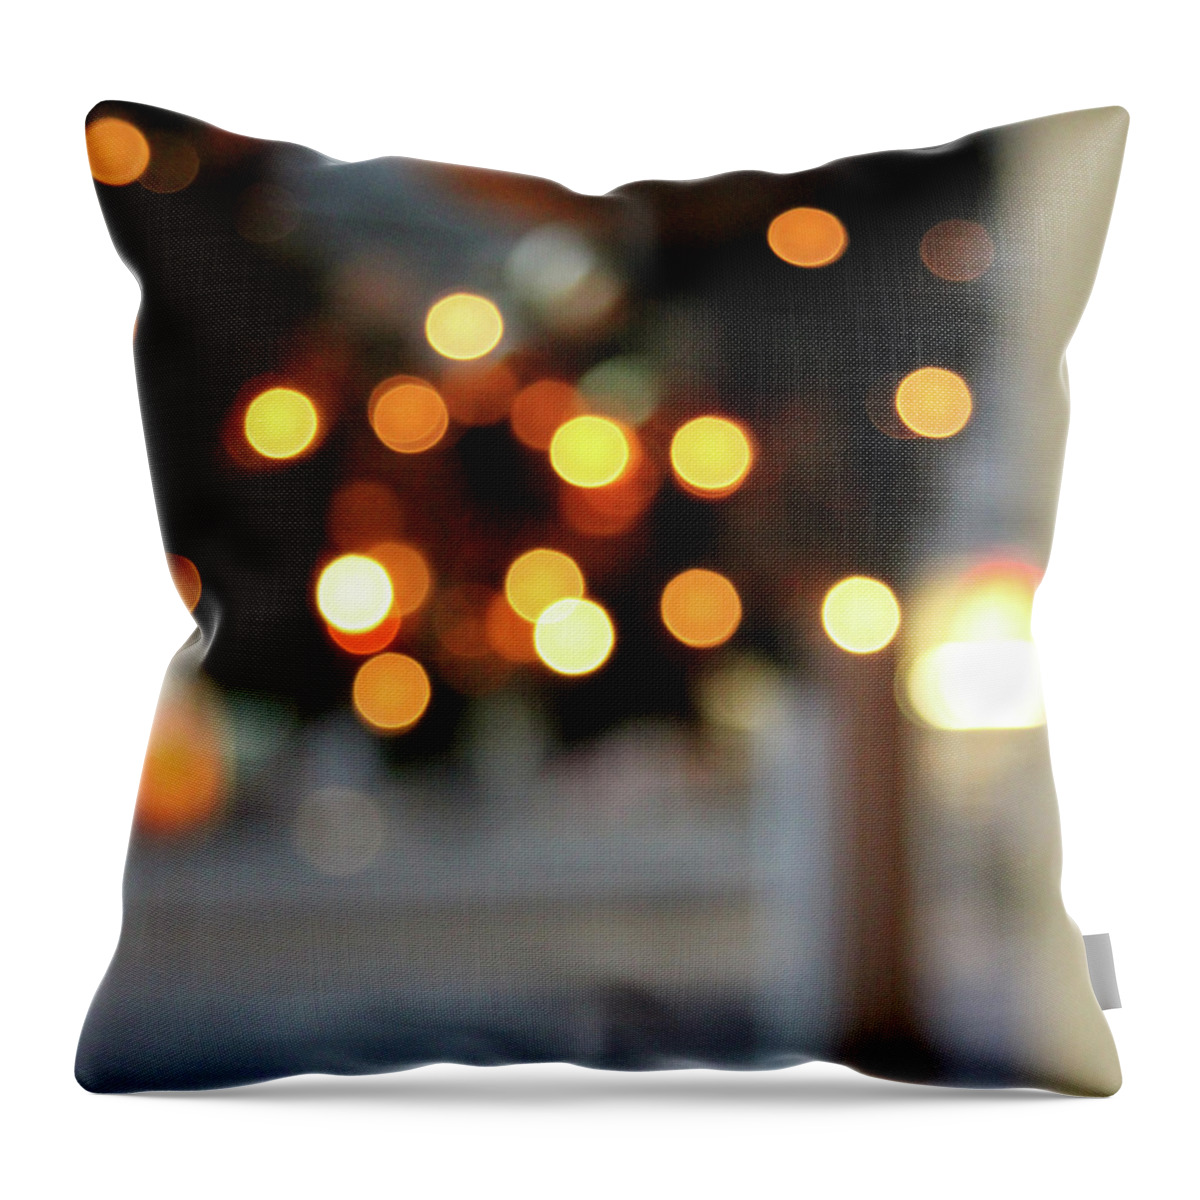 Wreath Throw Pillow featuring the photograph Christmas Wreath- Photography by Linda Woods by Linda Woods